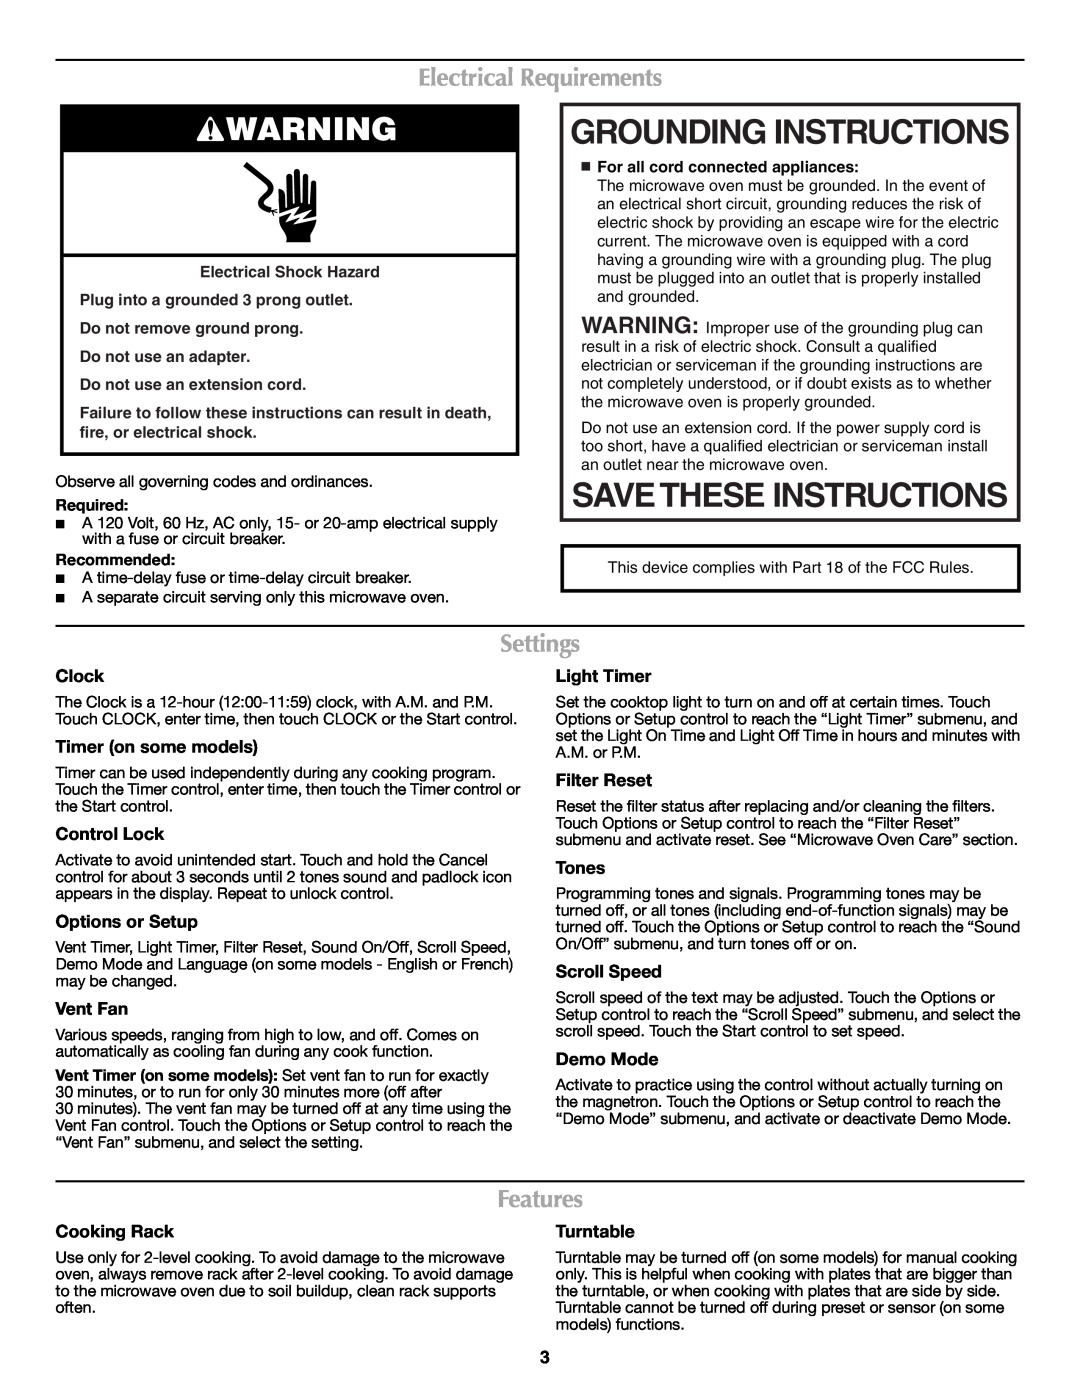 Maytag MMV4203WS Grounding Instructions, Electrical Requirements, Settings, Features, Clock, Timer on some models, Tones 